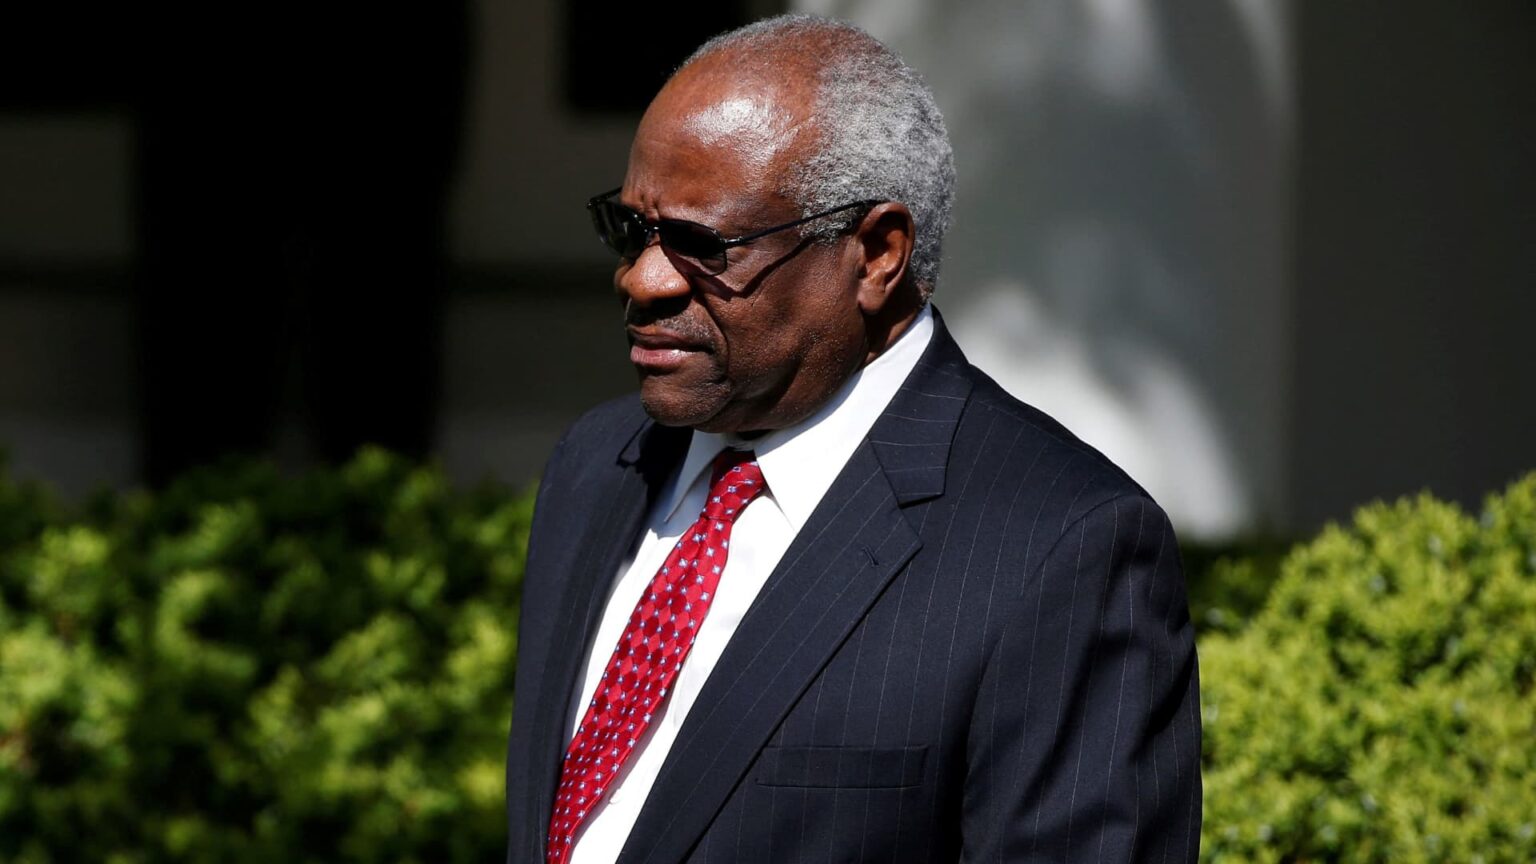 Clarence Thomas has claimed thousands